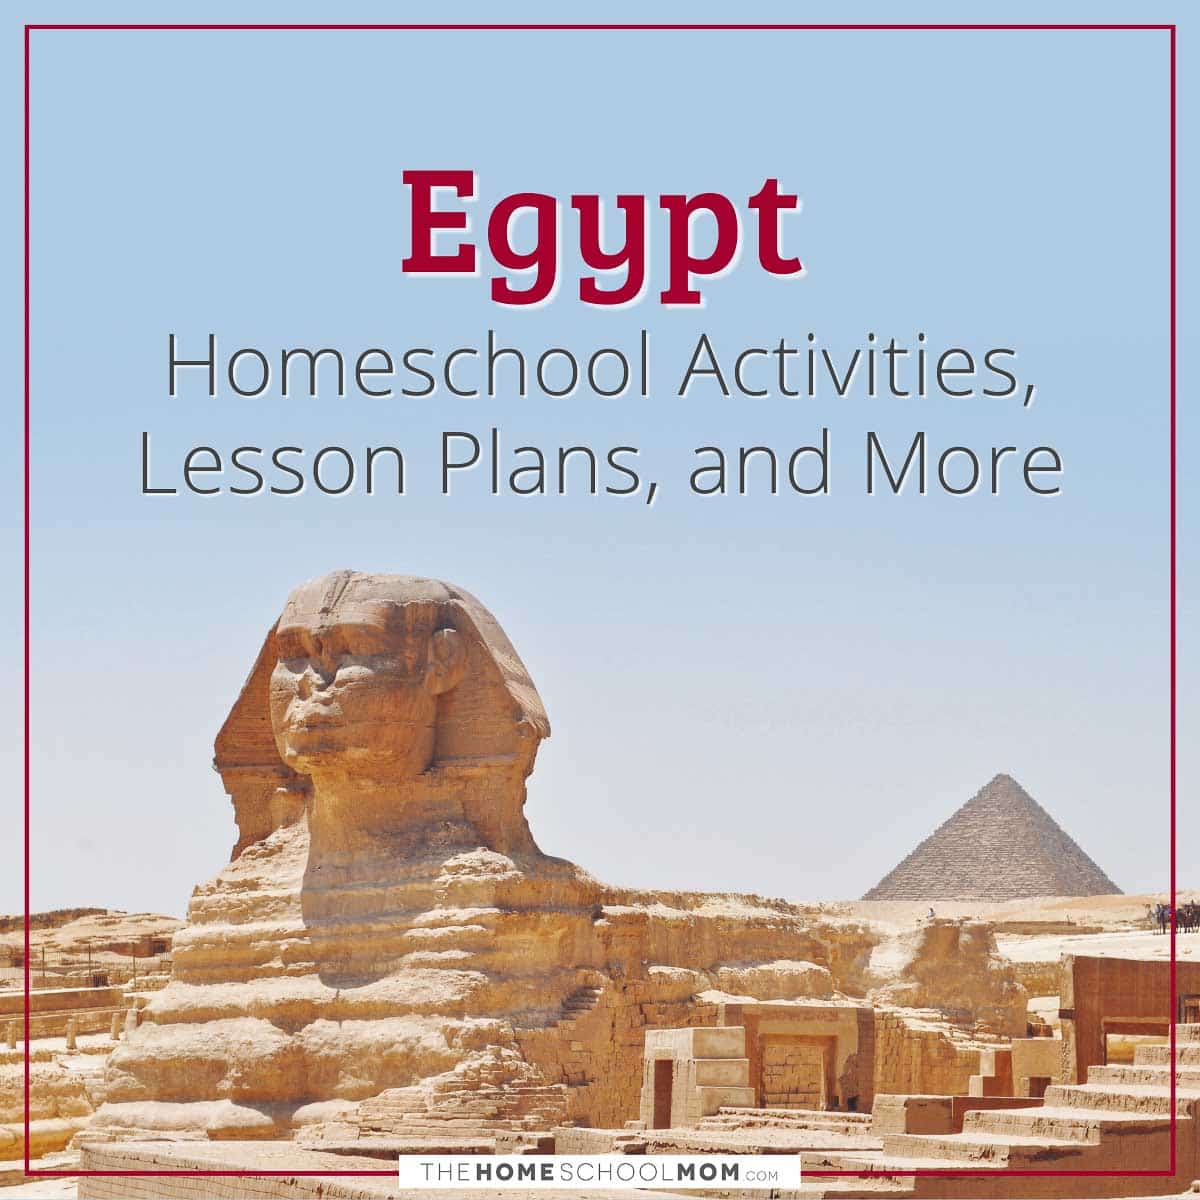 Egypt Homeschool Activities, Lesson Plans, and More.